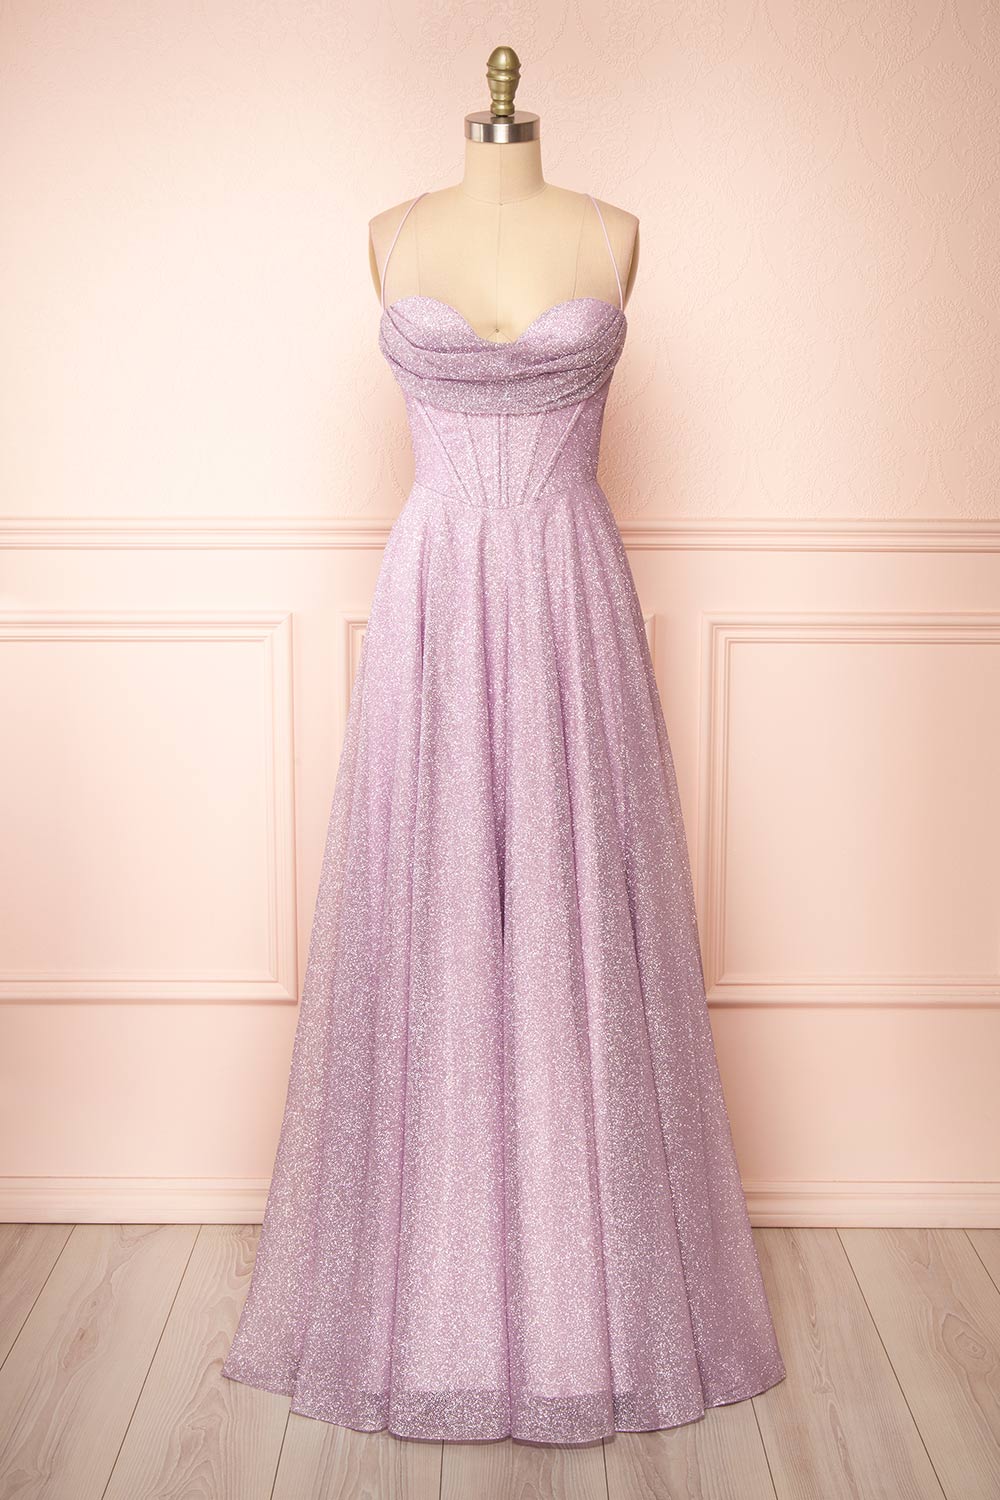 Lexy Lilac Sparkly Cowl Neck Maxi Dress | Boutique 1861 front view 